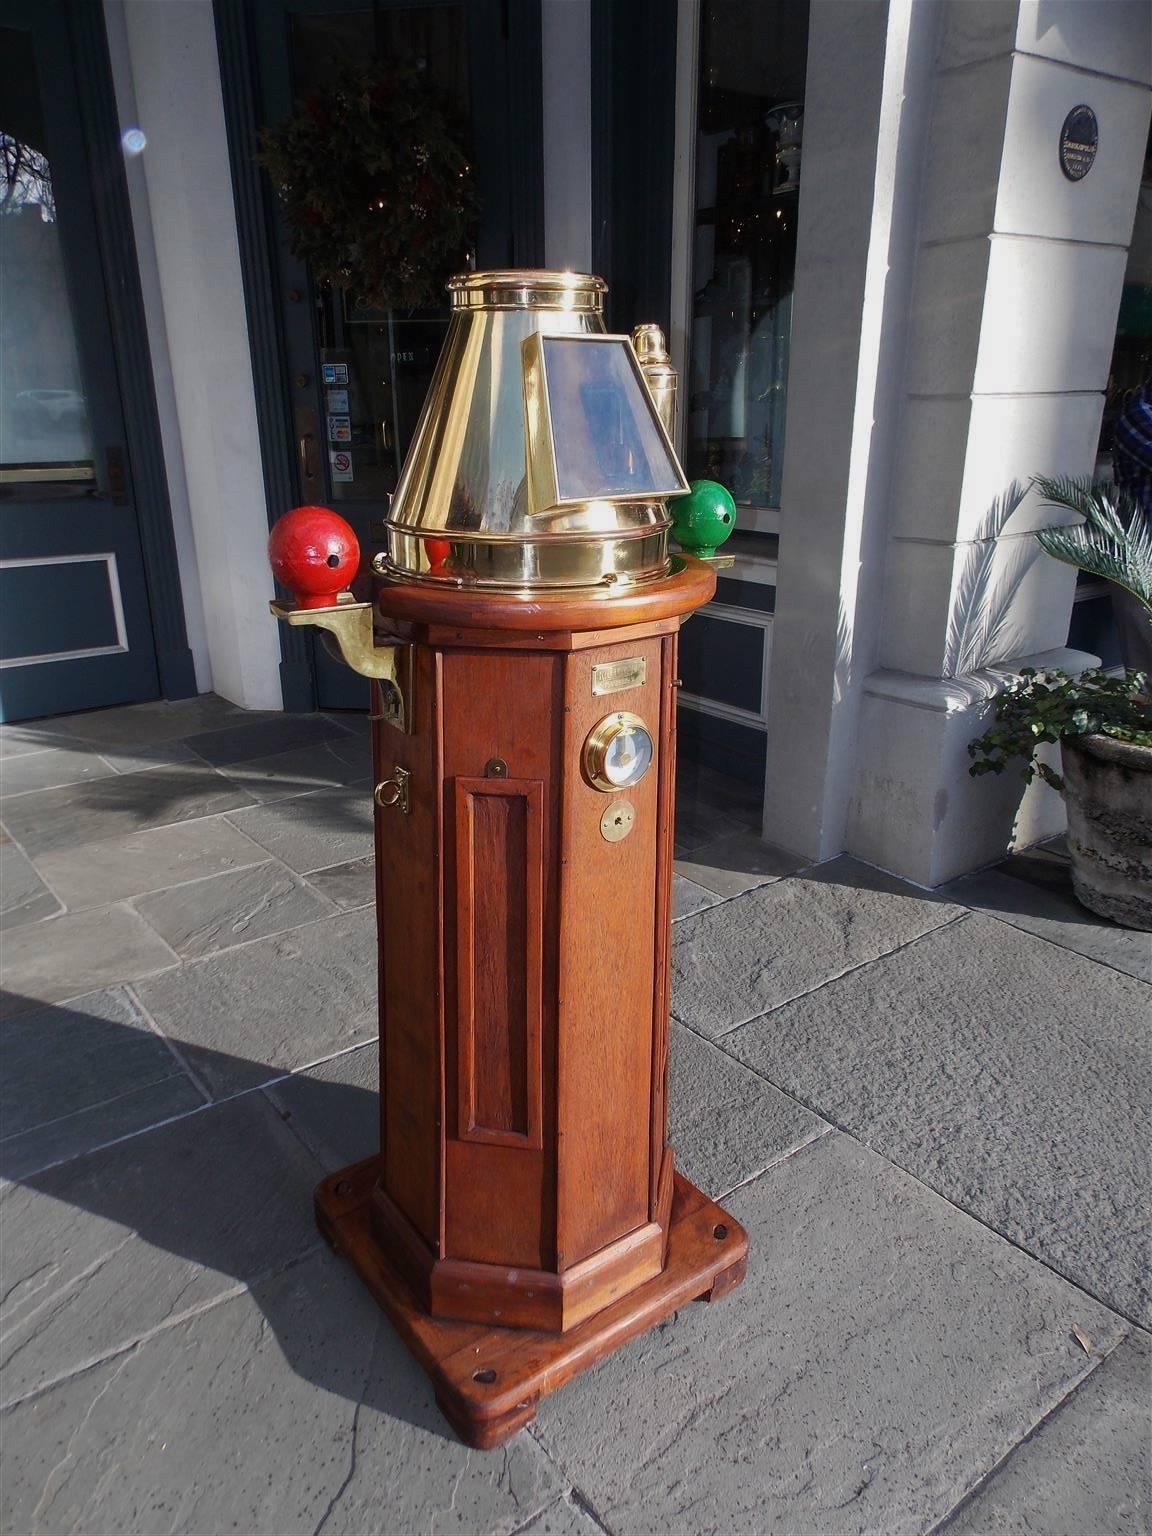 This highly desirable and fine nautical instrument is made of carved mahogany with a brass and glass hood covering a gimbaled compass and flindler's tube with cap. The eight sided binnacle was deck mounted and has painted cast iron port and